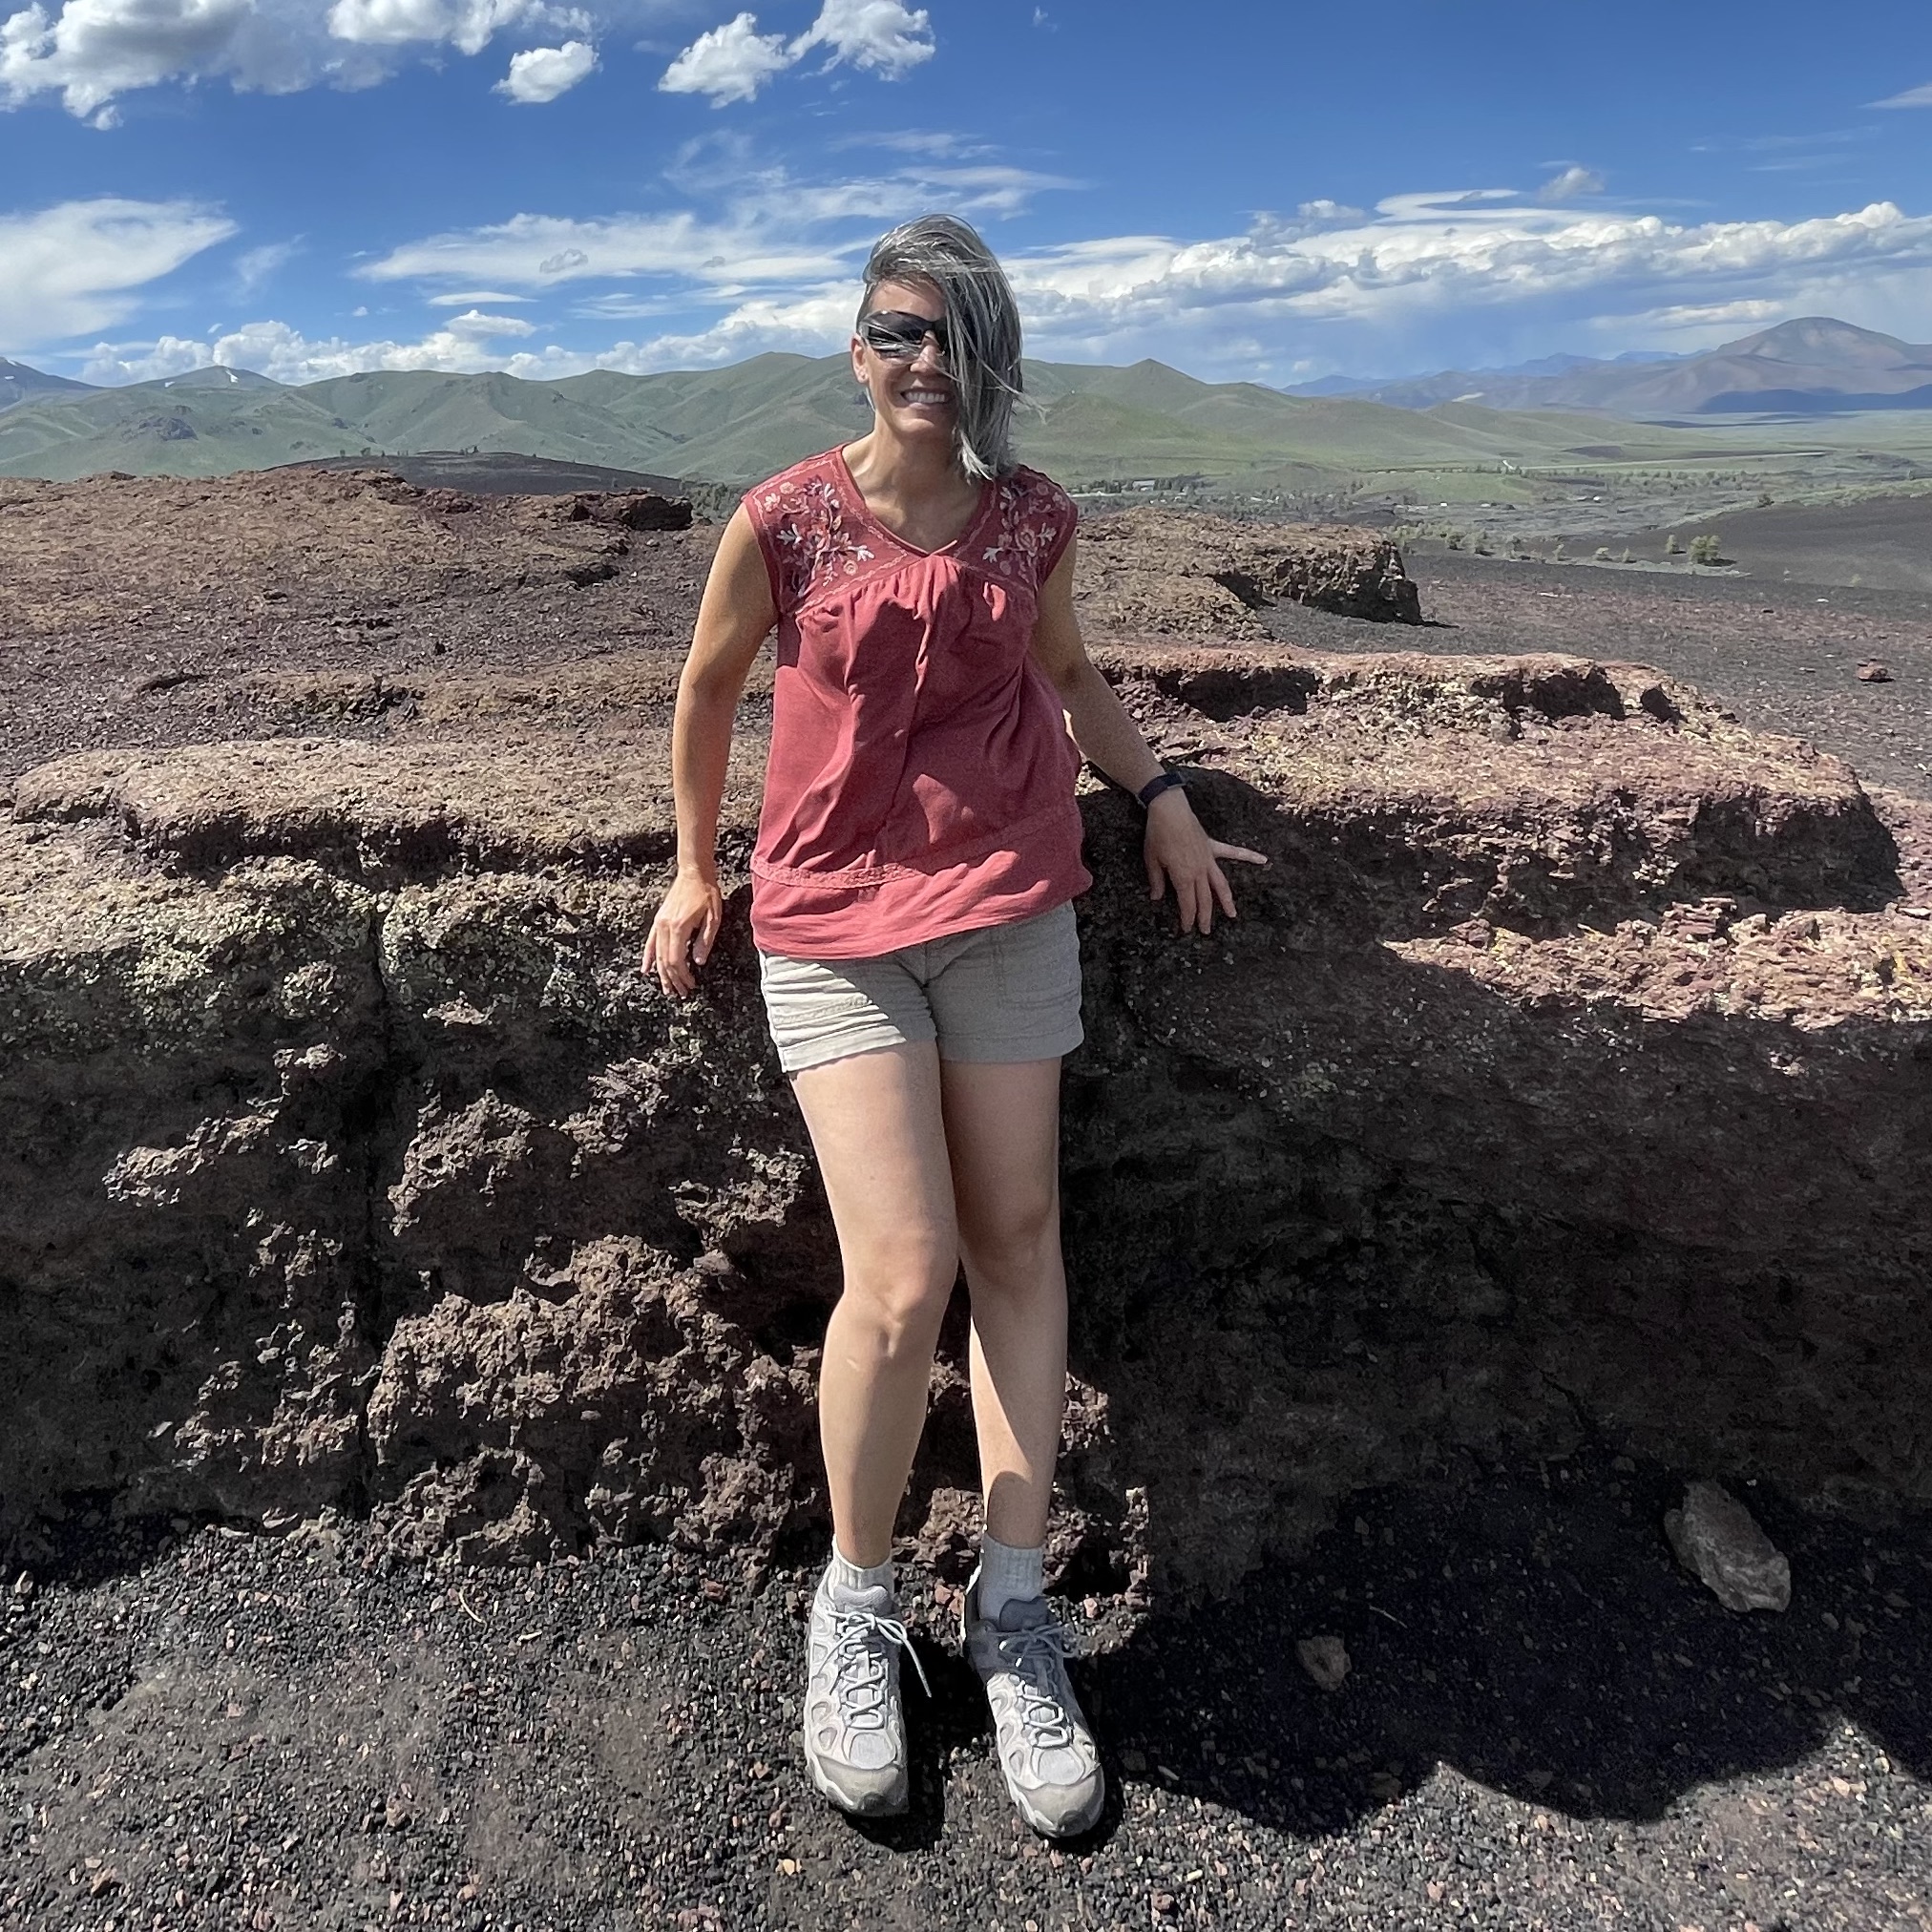 Beth in coral shirt and tan shorts standing in front of lava fields.